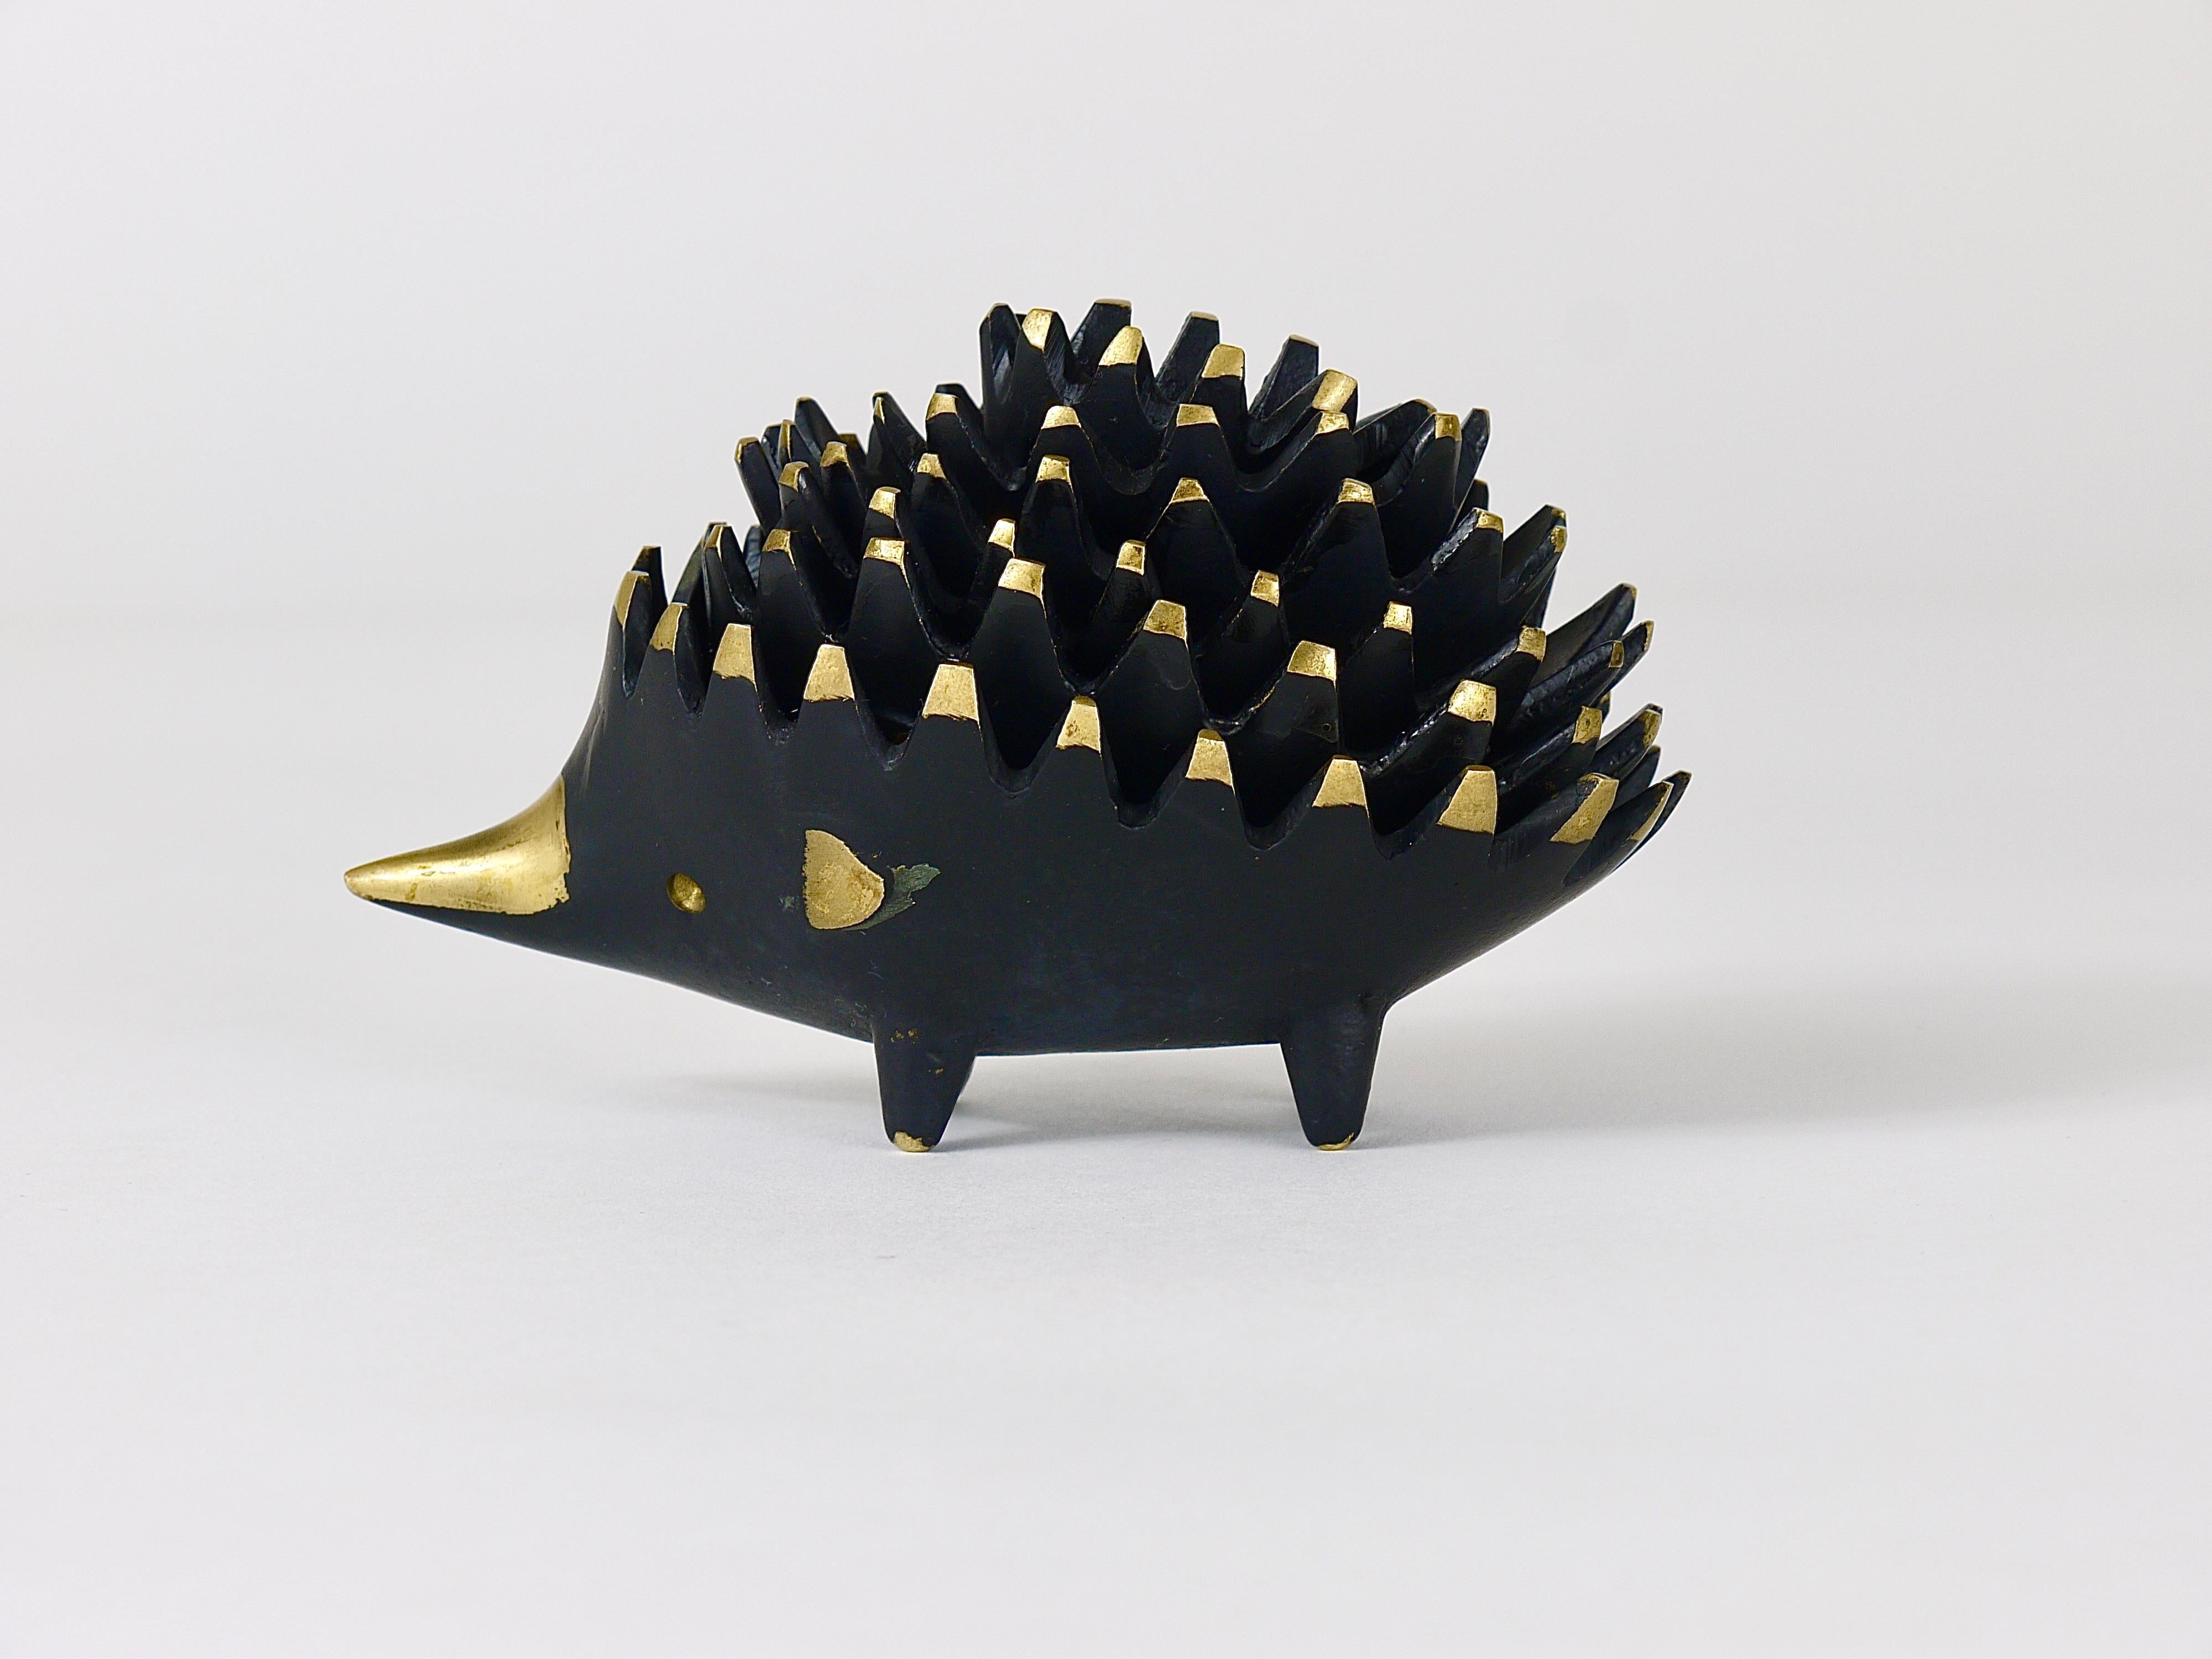 A complete set of six vintage stackable midcentury hedgehog ashtrays. A very humorous design by Walter Bosse, executed by Hertha Baller, Austria in the 1950s. Made of brass, in good condition with nice patina.